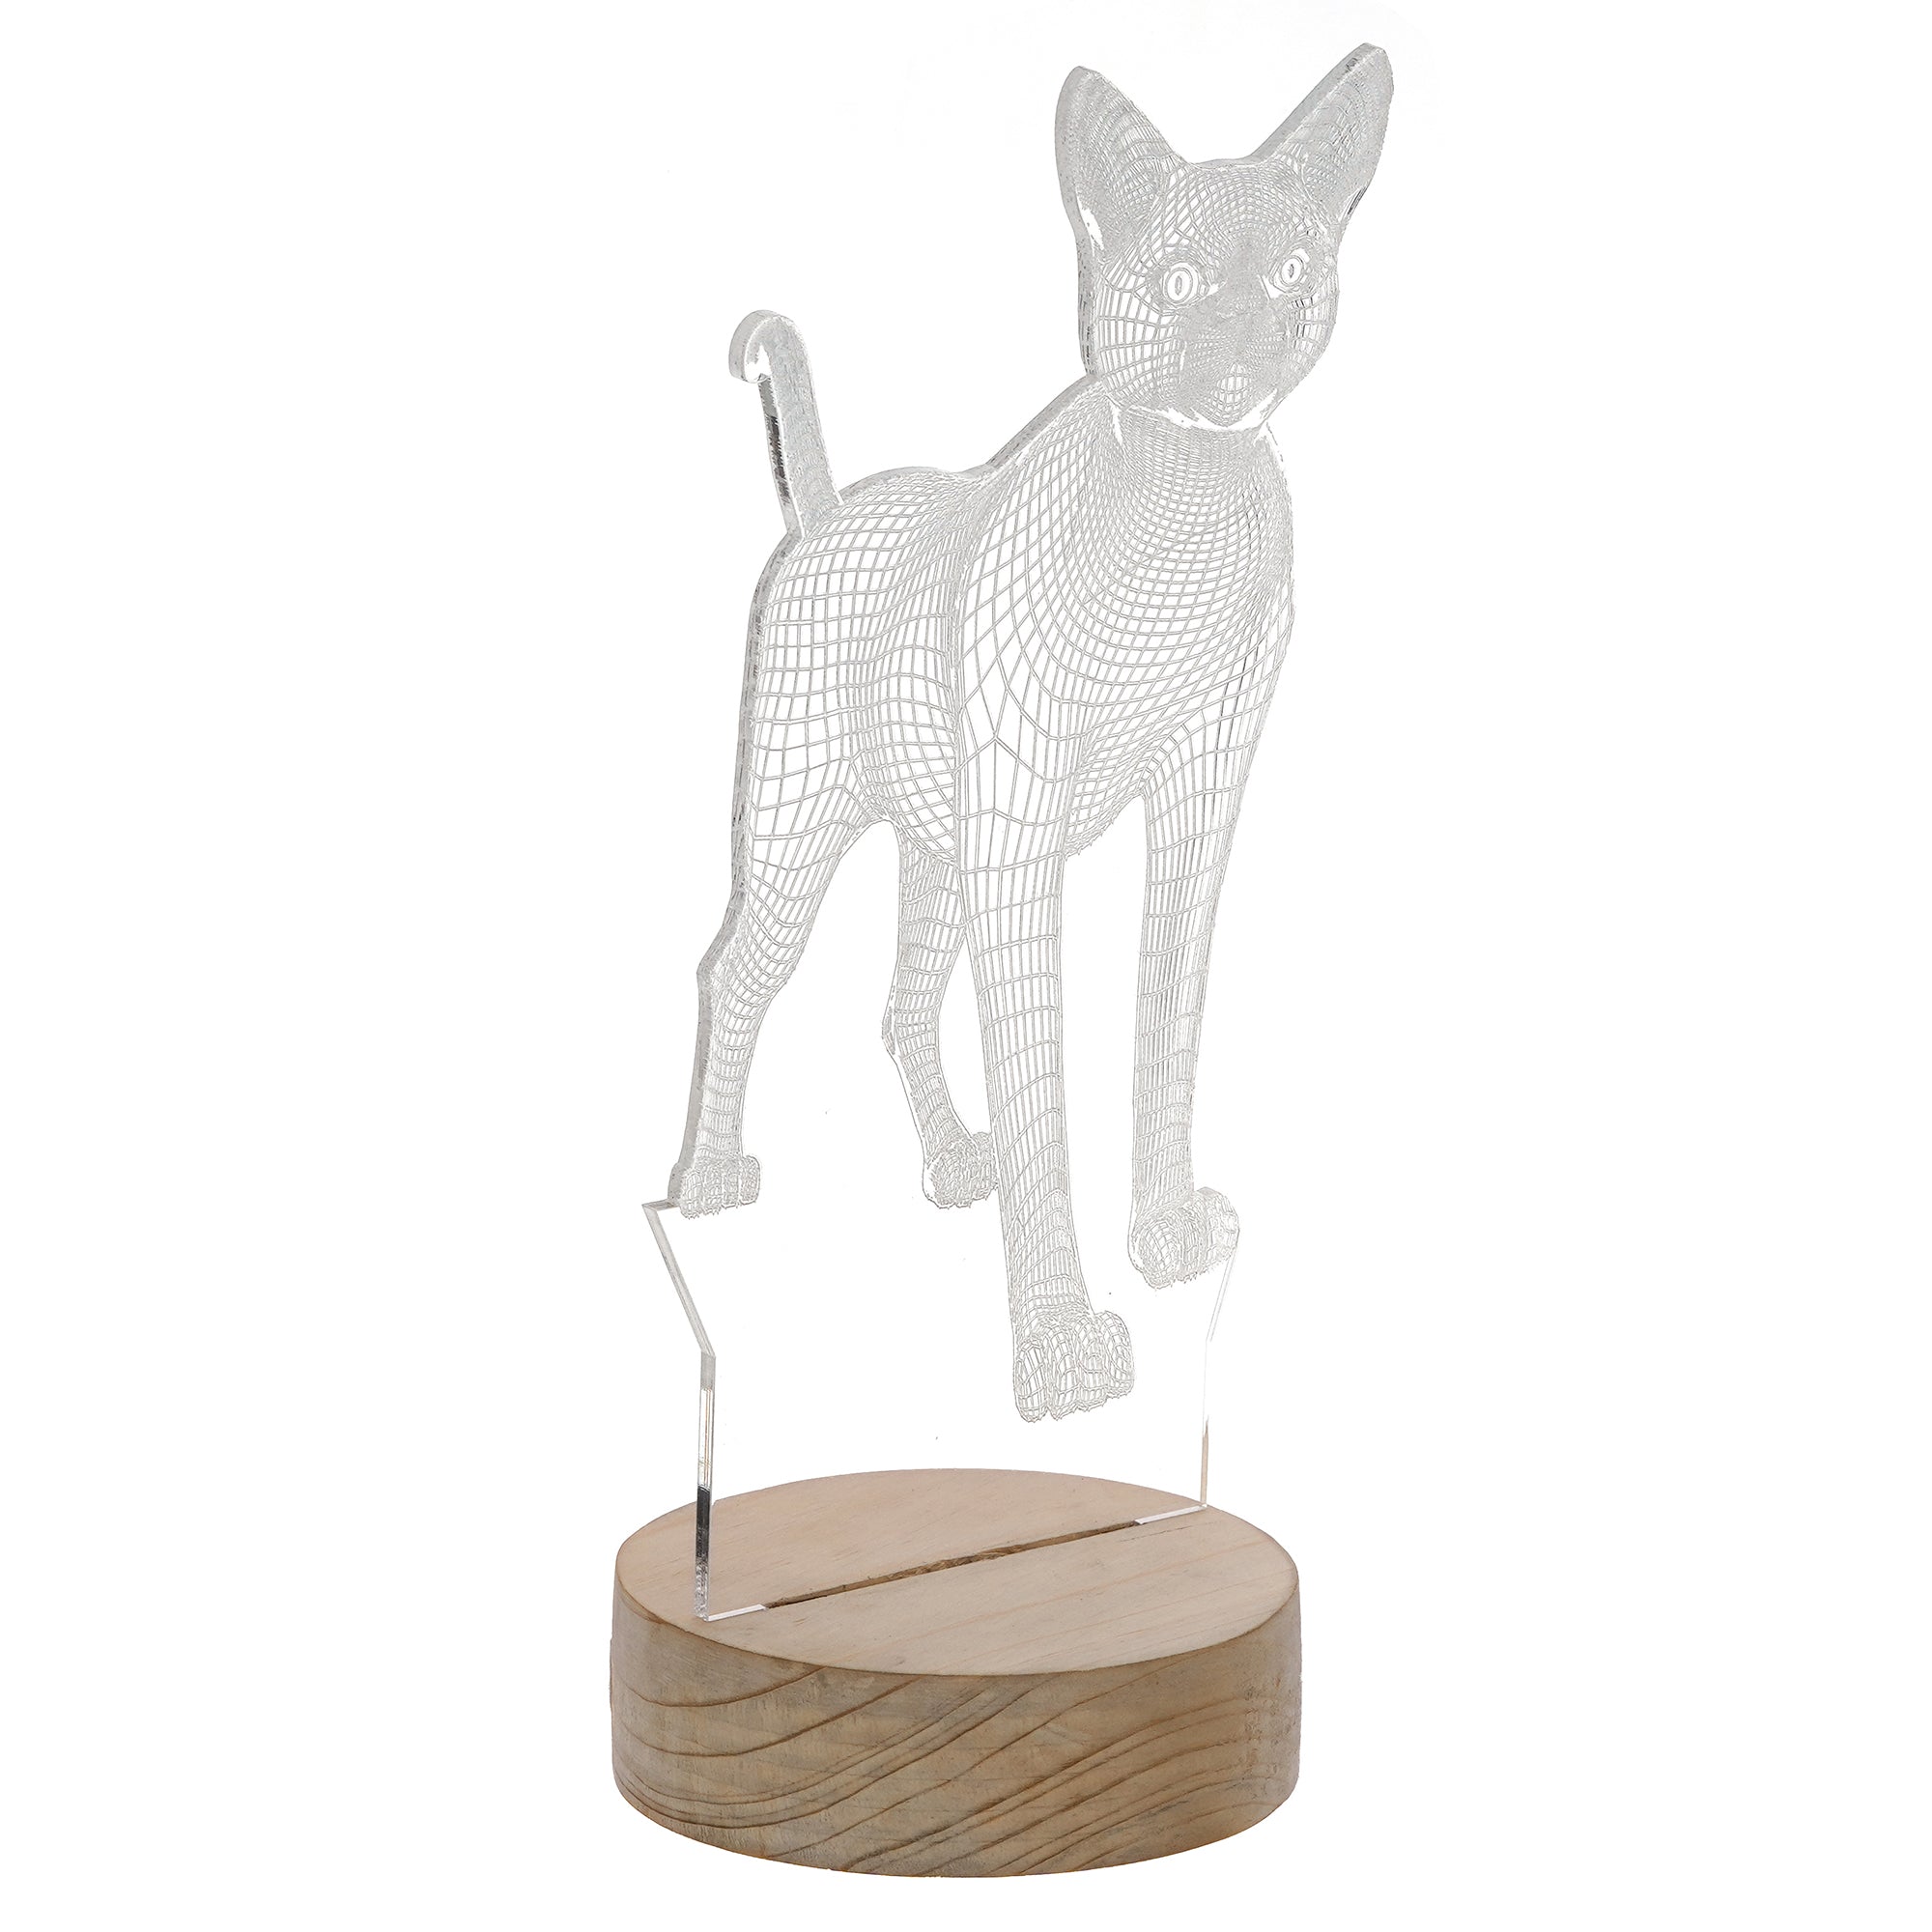 Standing Cat Design Carved on Acrylic & Wood Base Night Lamp 5